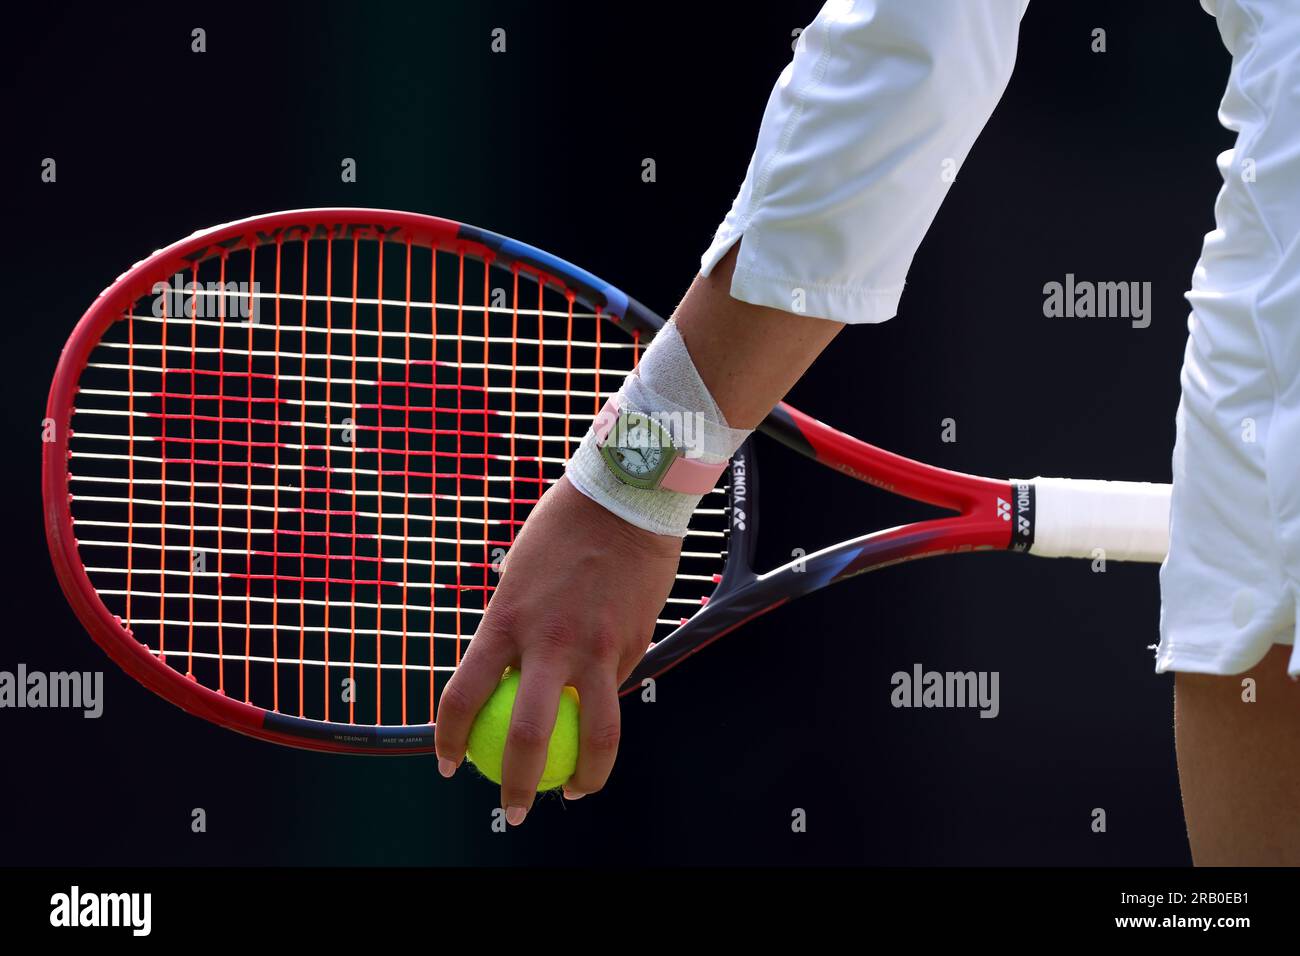 Detailed view of the F.P. Journe watch worn by Donna Vekic during her match against Sloane Stephens (not pictured) on day four of the 2023 Wimbledon Championships at the All England Lawn Tennis and Croquet Club in Wimbledon. Picture date: Thursday July 6, 2023. Stock Photo